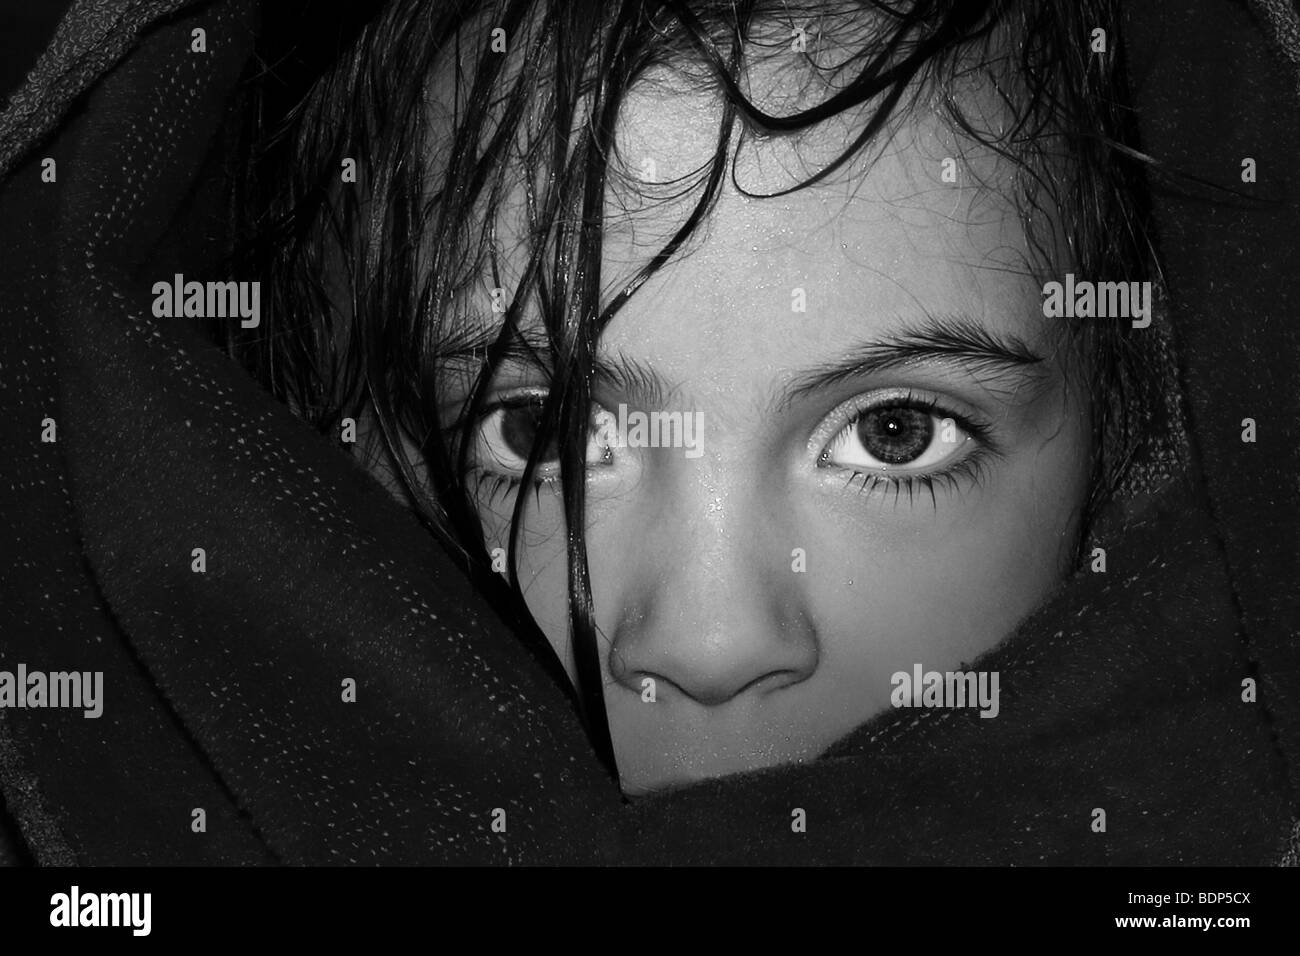 Black and white image of a young female child wrapped in a blanket looking out with large eyes and wet hair.. Stock Photo